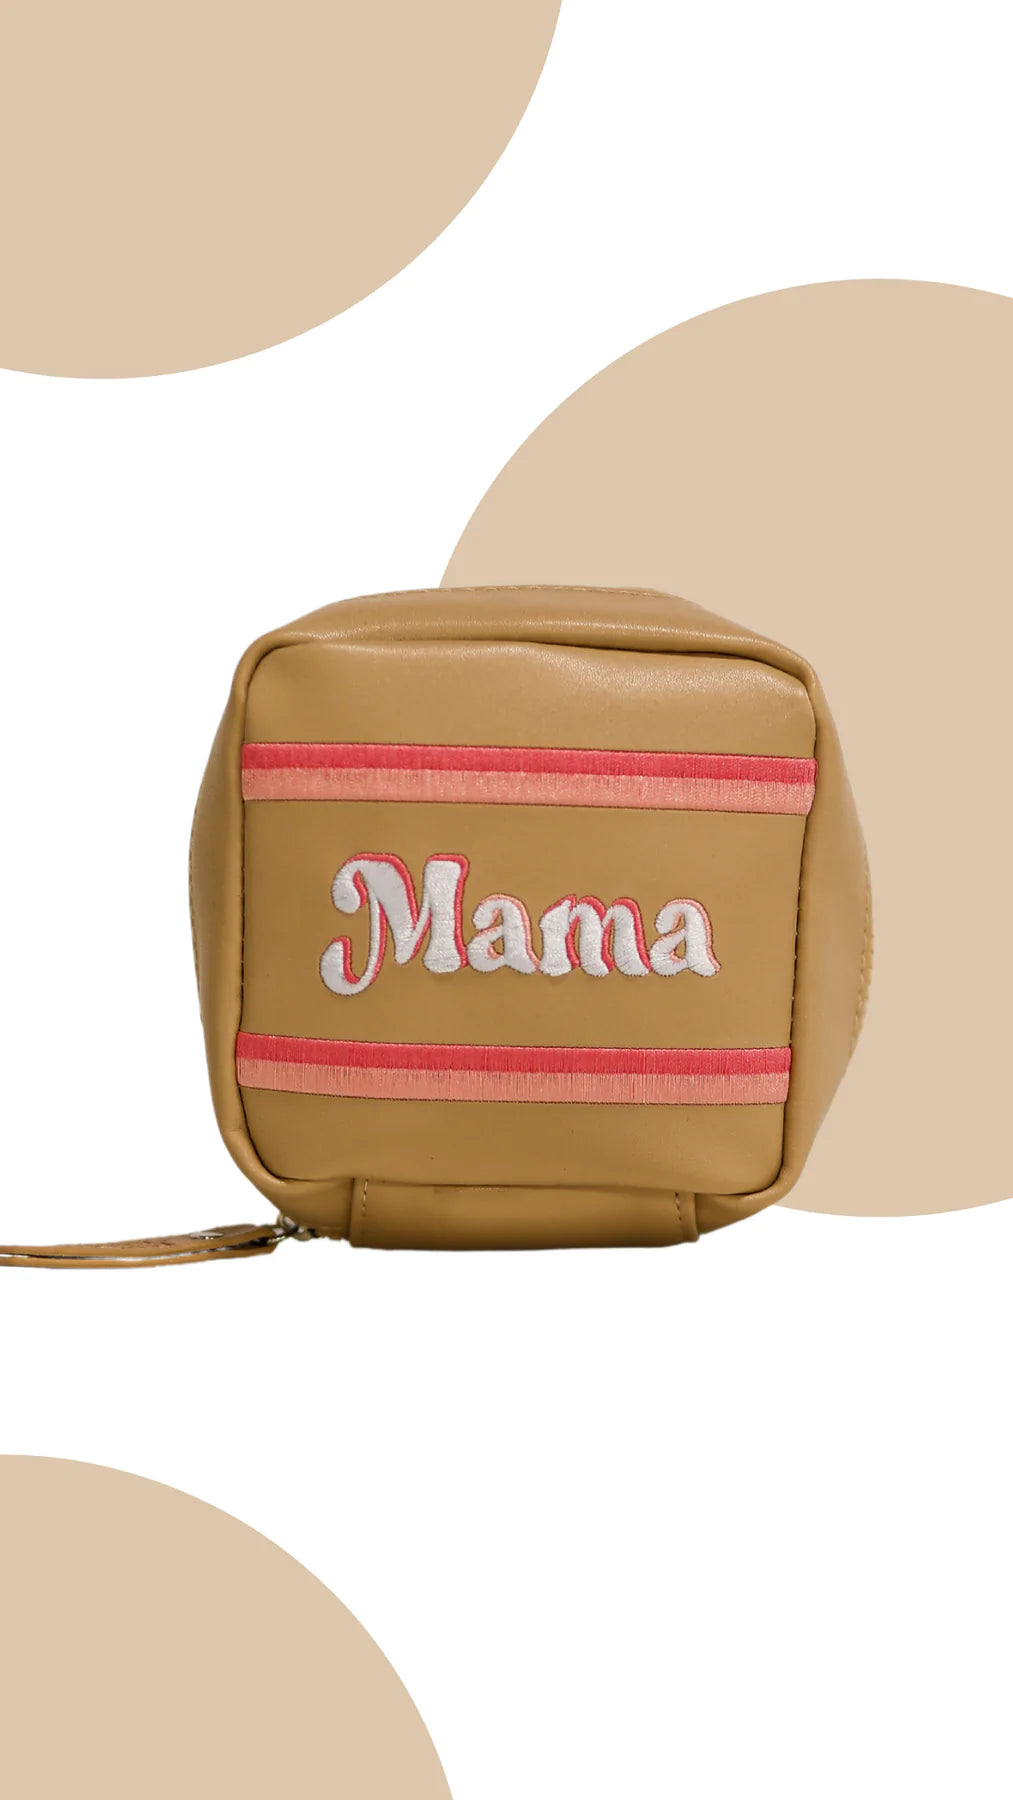 'Mama' Tan Travel Pouch